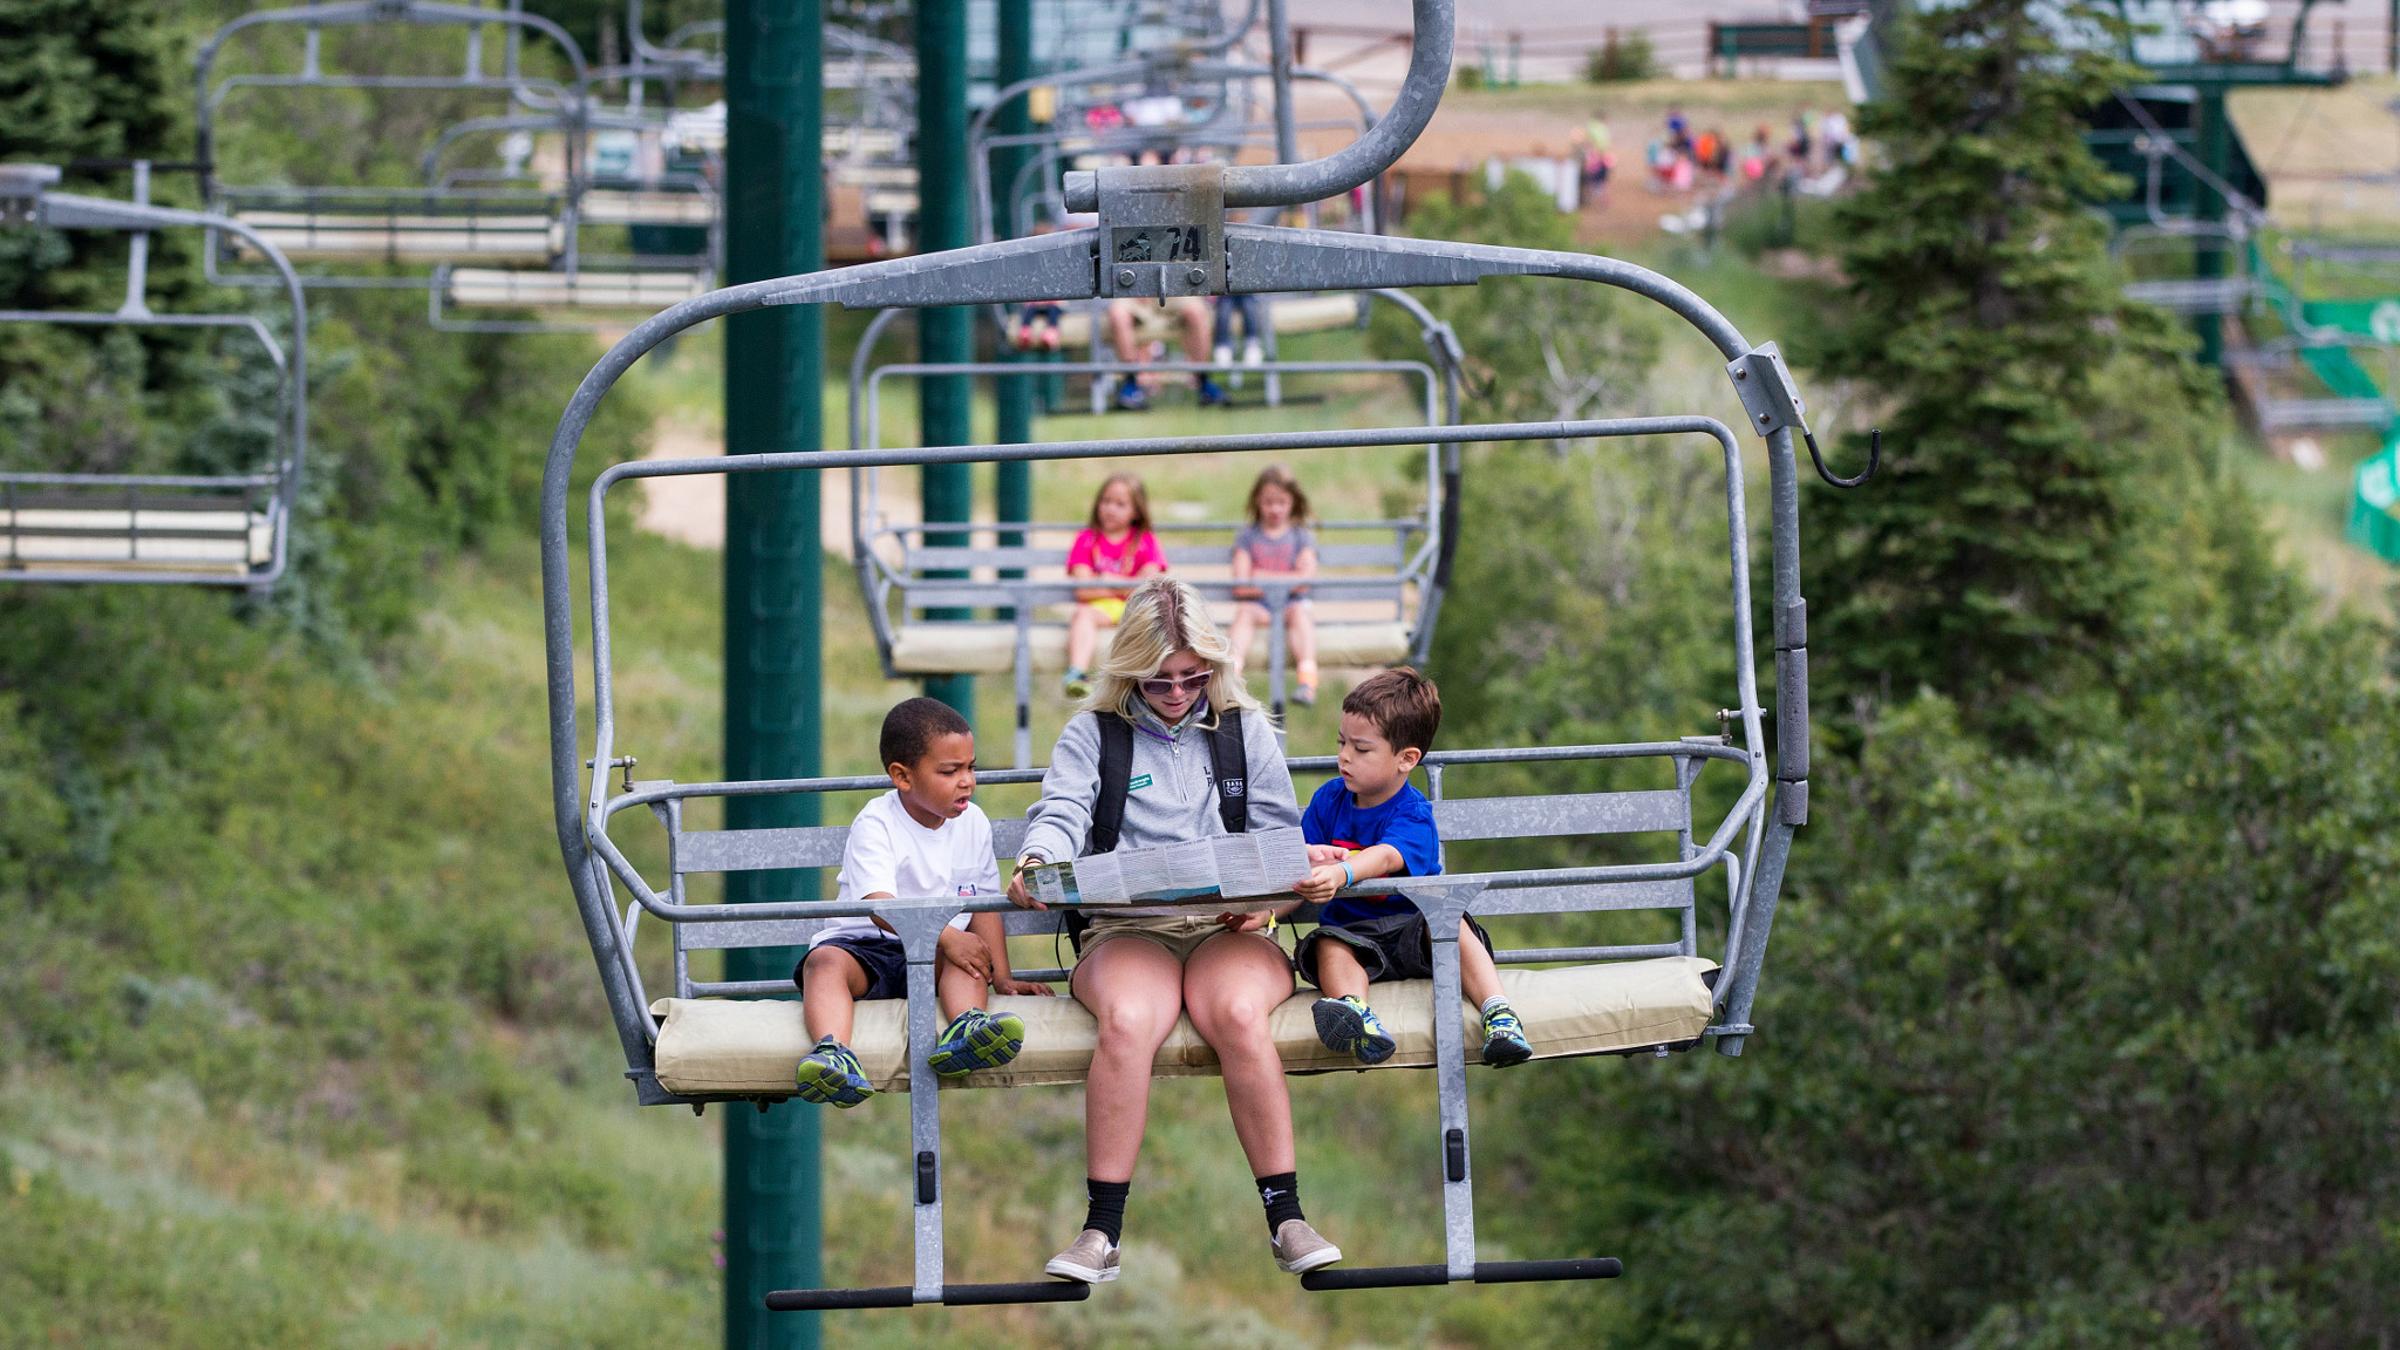 Campers riding on a chairlift with a counselor